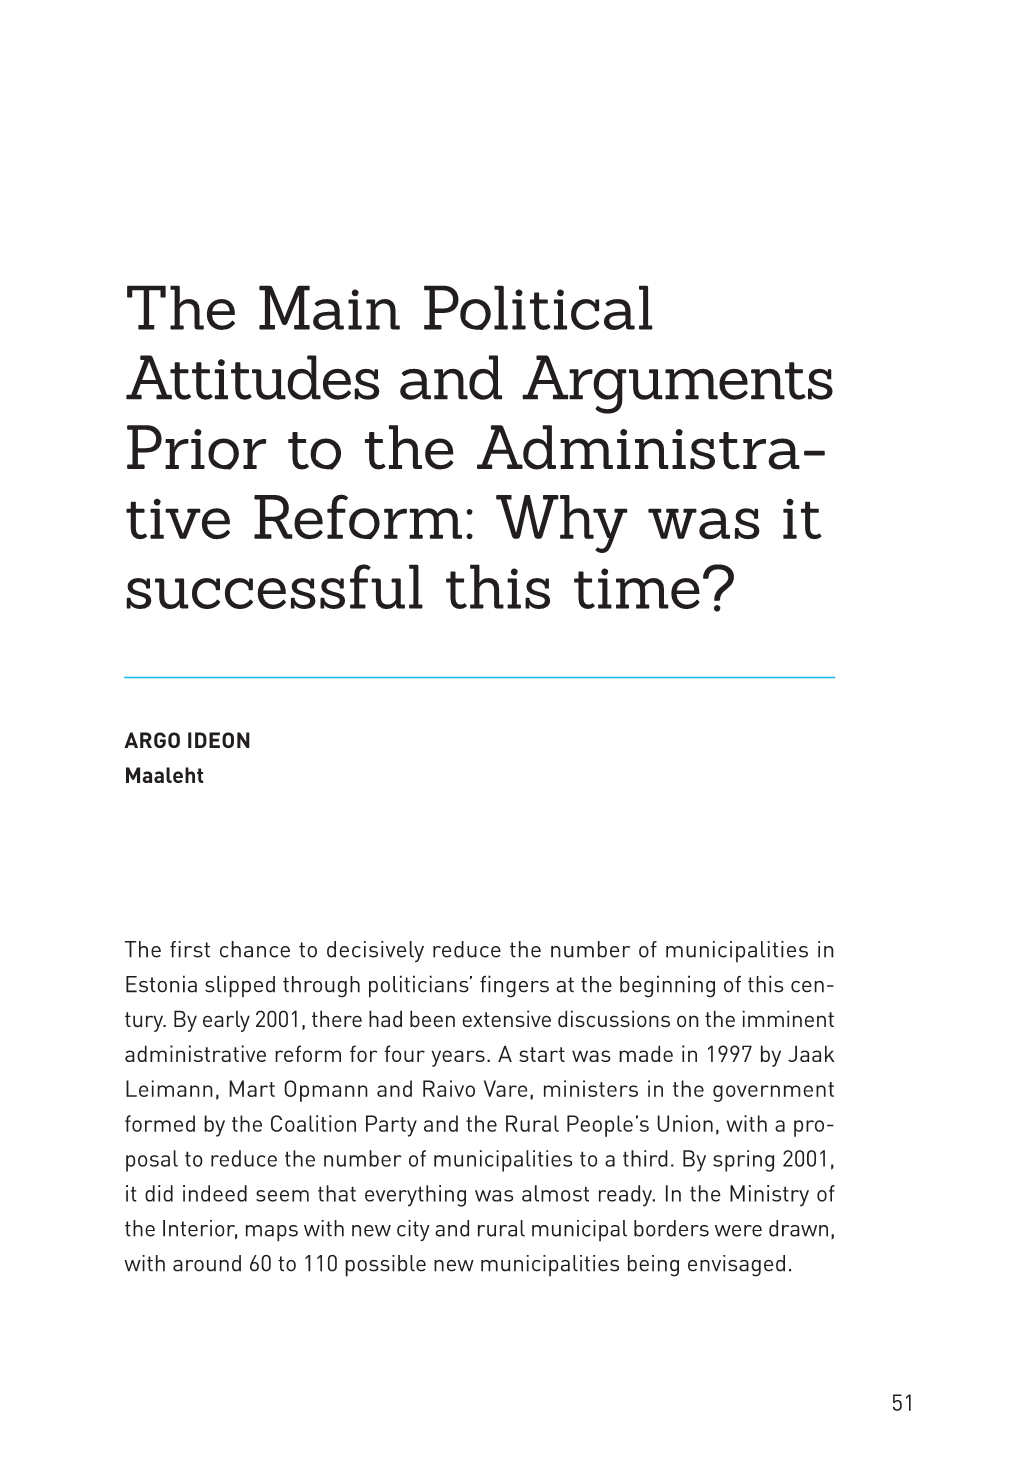 The Main Political Attitudes and Arguments Prior to the Administra- Tive Reform: Why Was It Successful This Time?